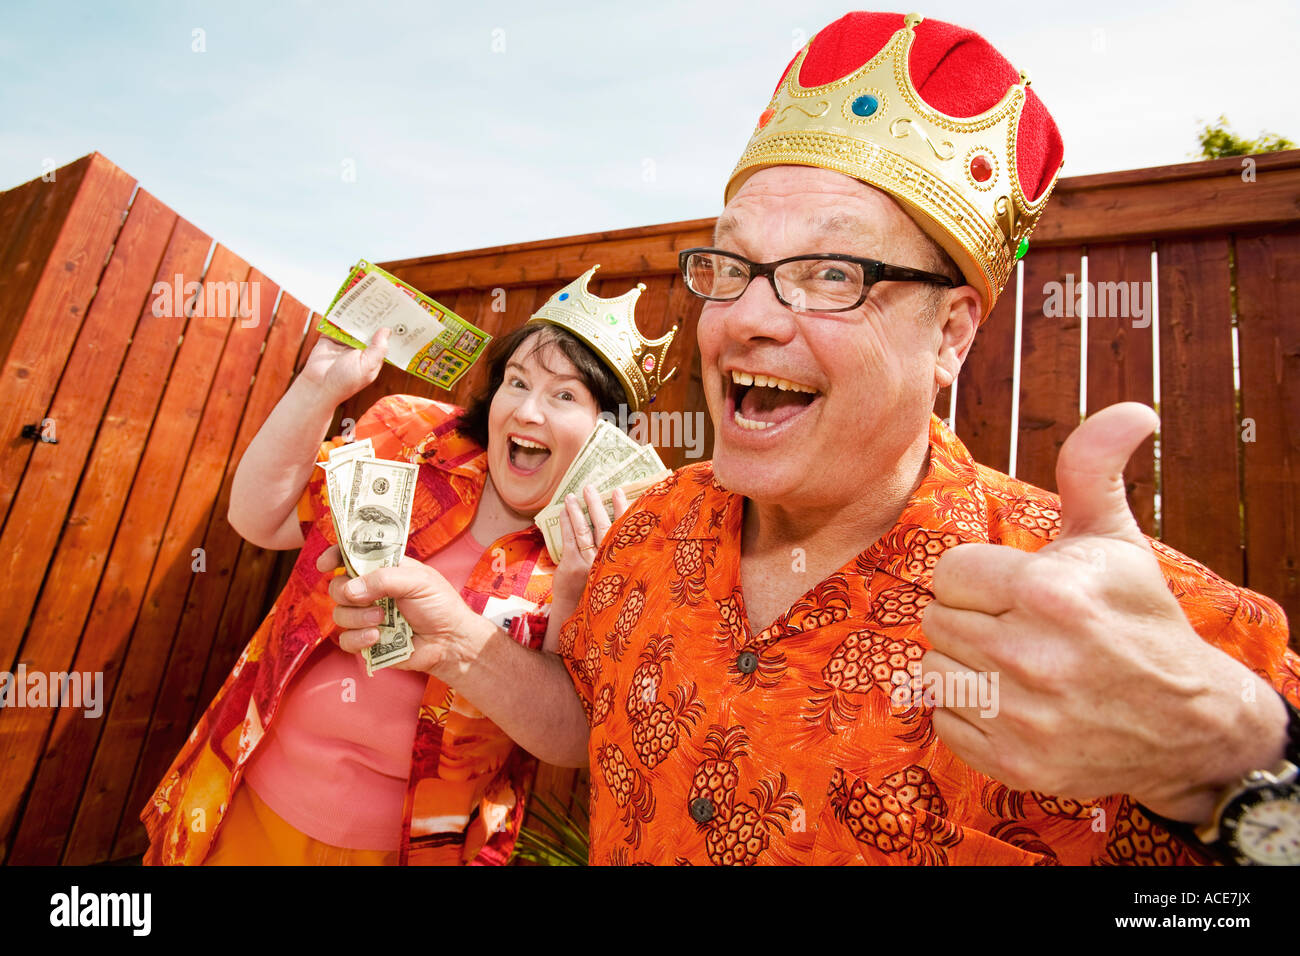 Couple in festive outfits and crowns Stock Photo